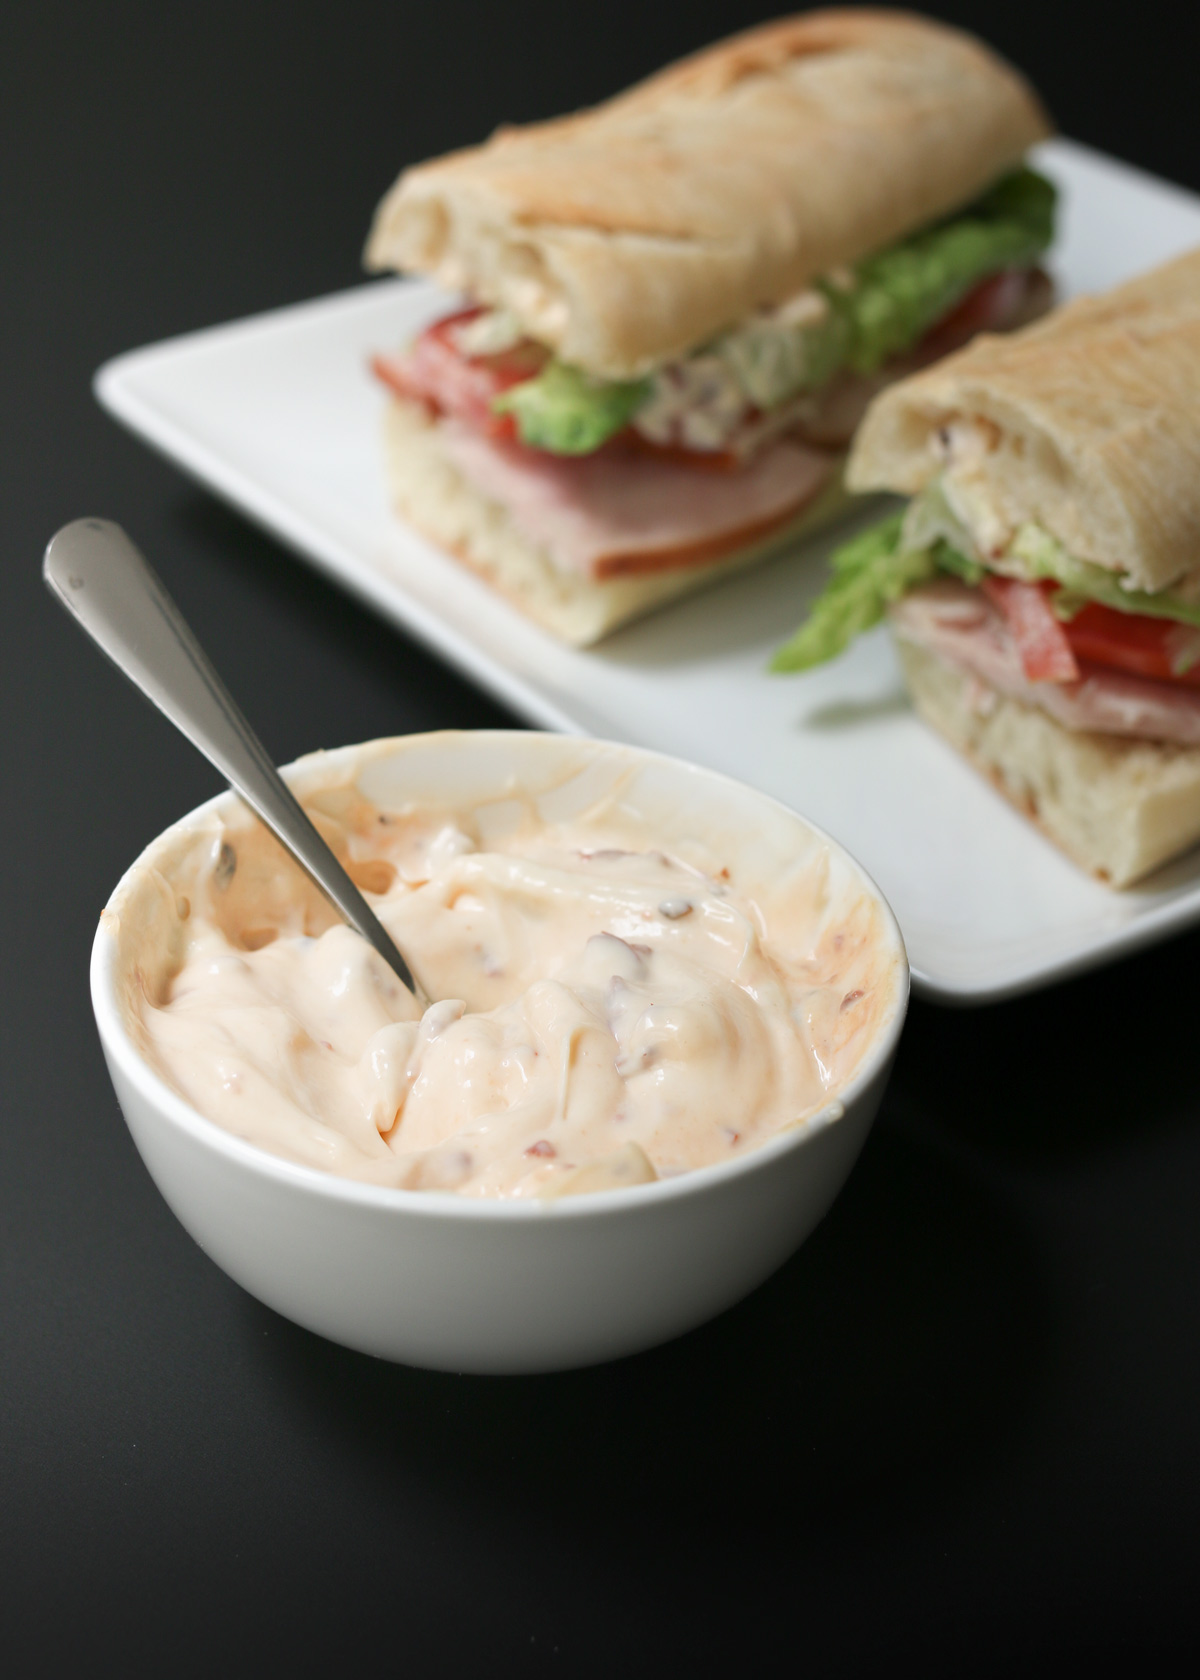 bowl of chipotle mayonnaise near a plate of sandwiches.